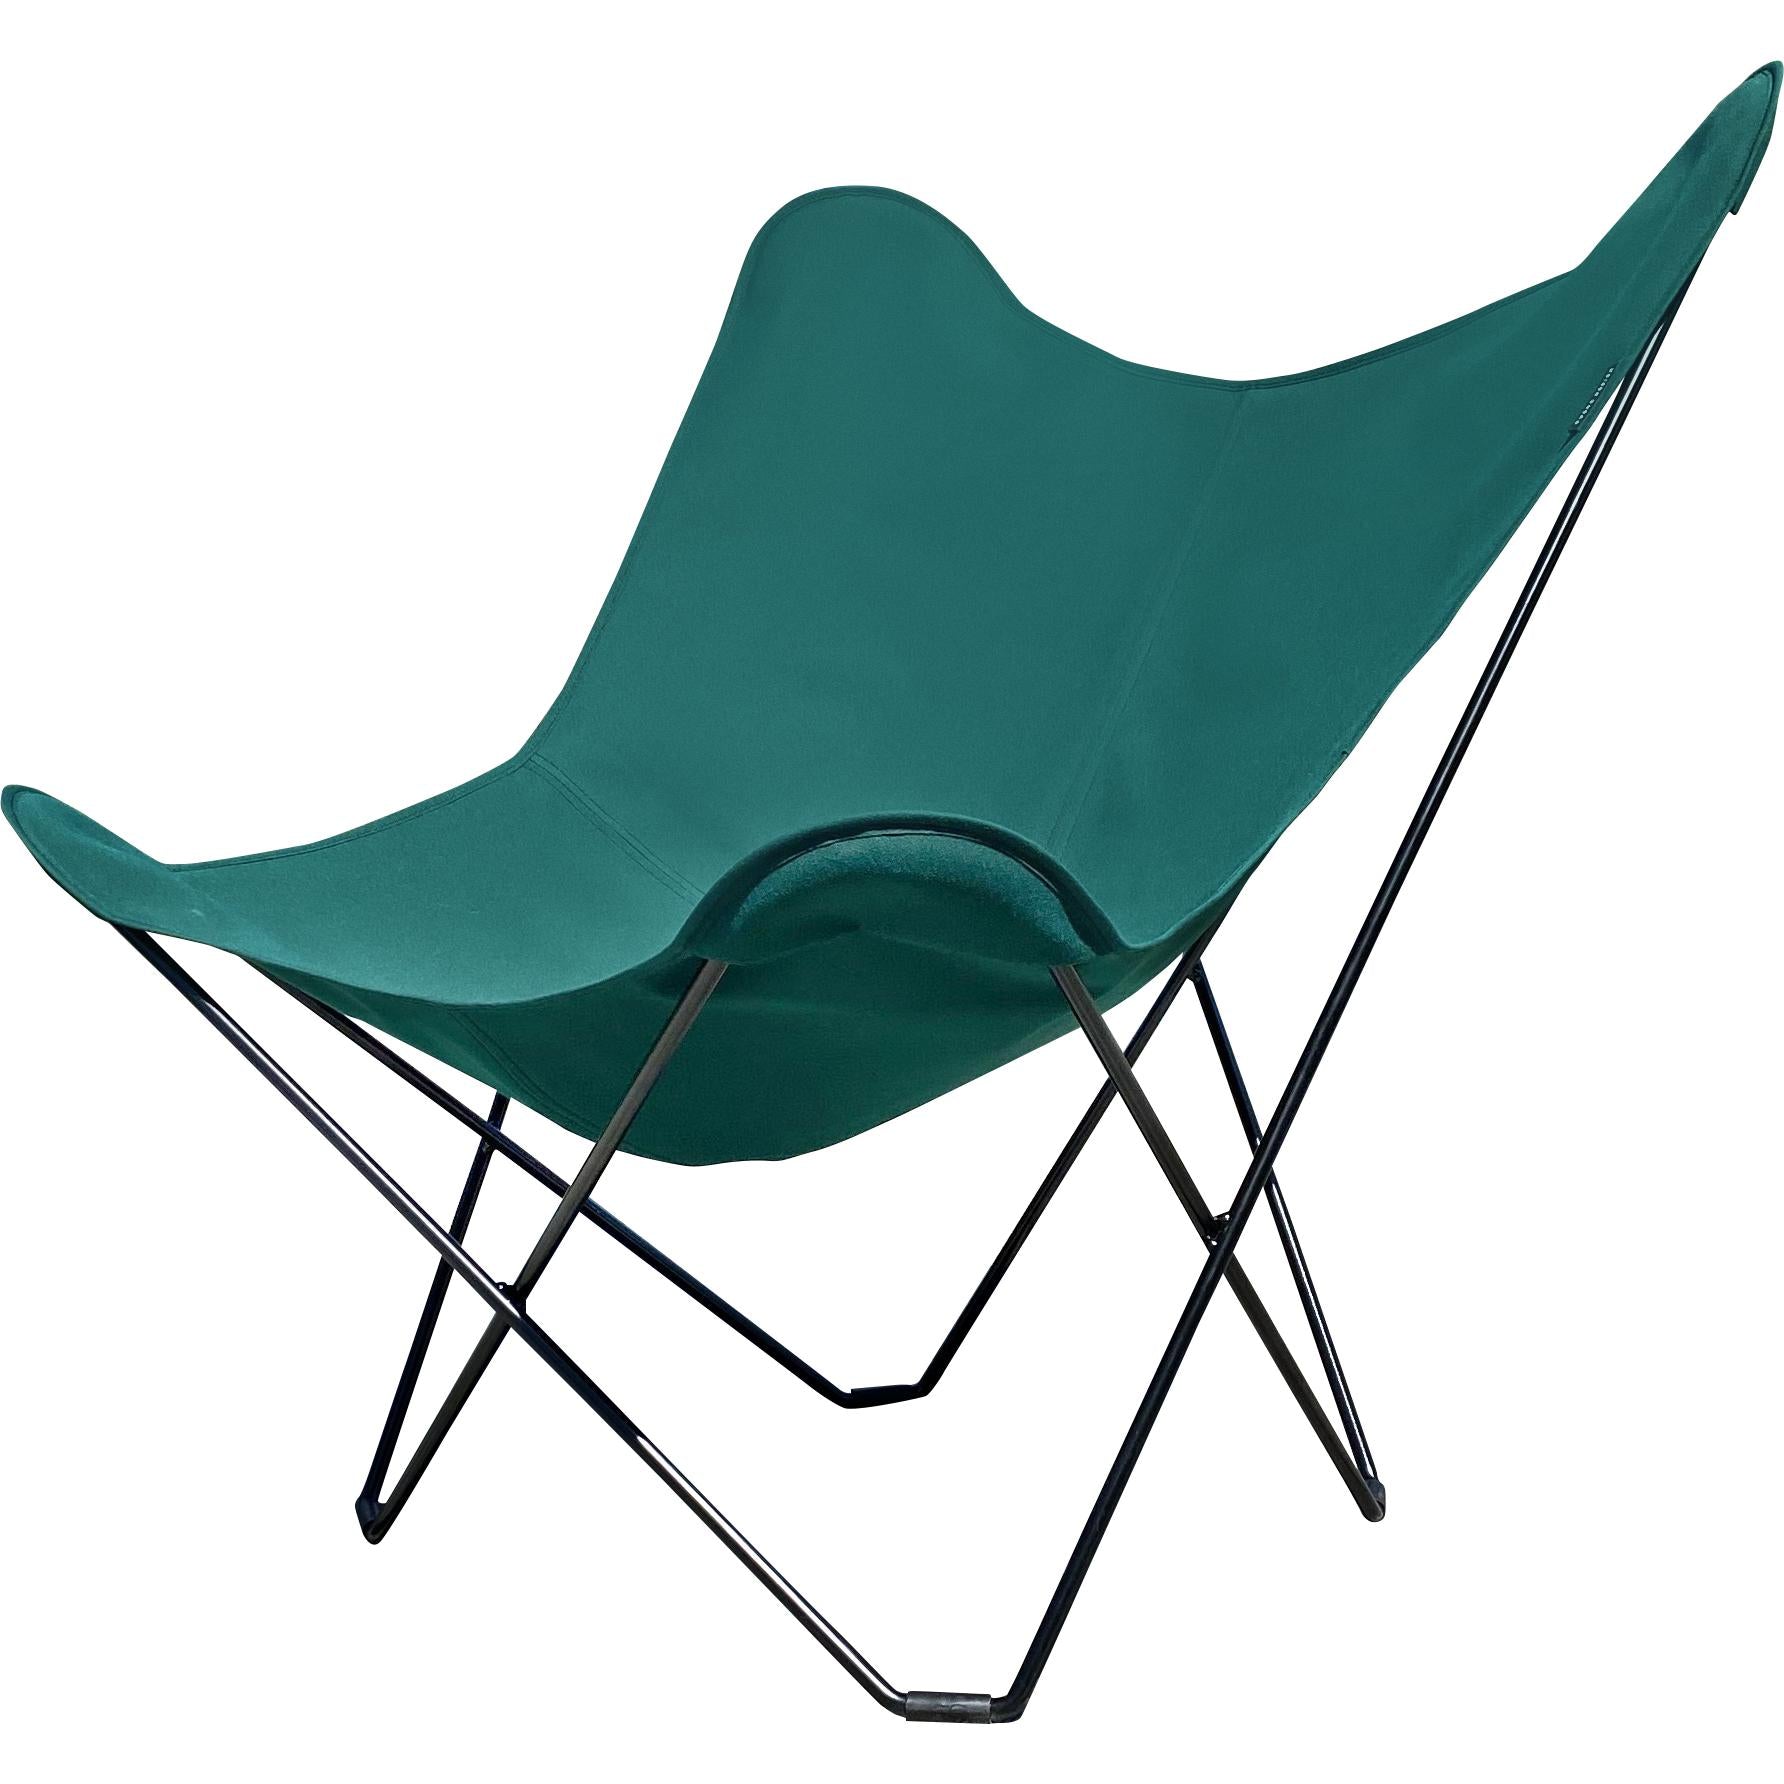 Cuero Sunshine Mariposa Butterfly Chaise, Forest Green / Black Outdoor Cadre